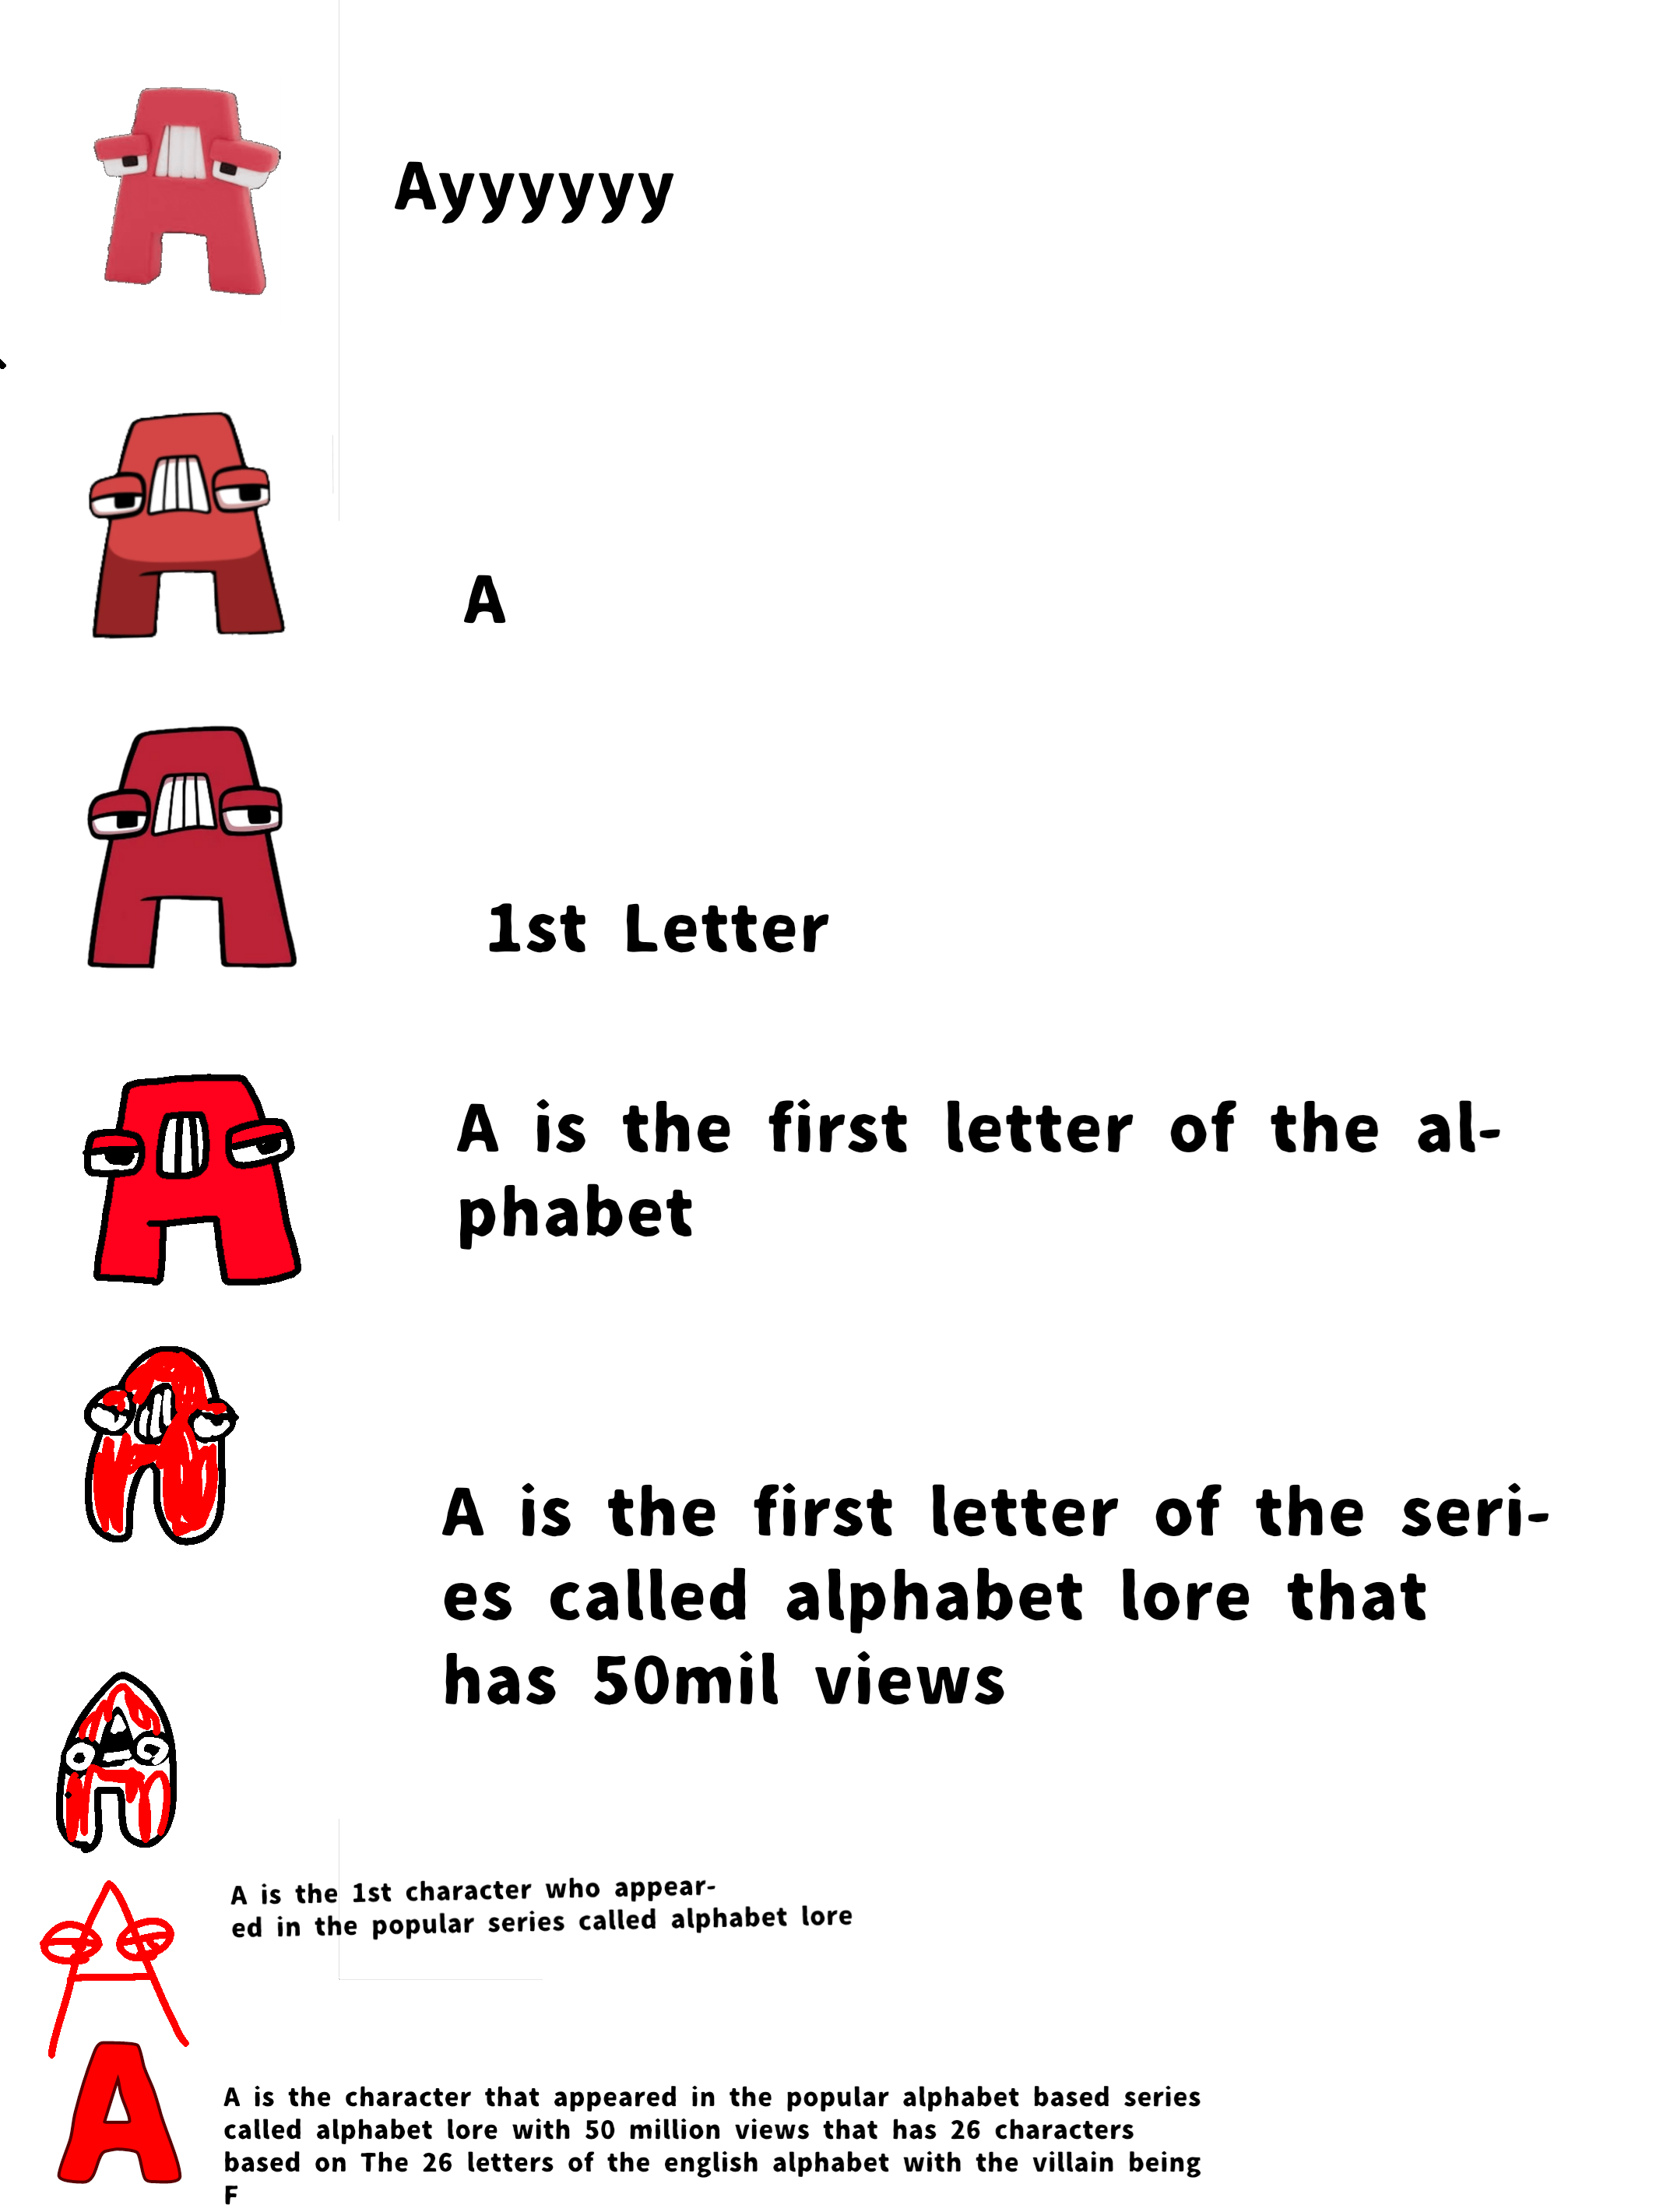 Alphabet lore memes part 2 (click on the image to show The full meme)